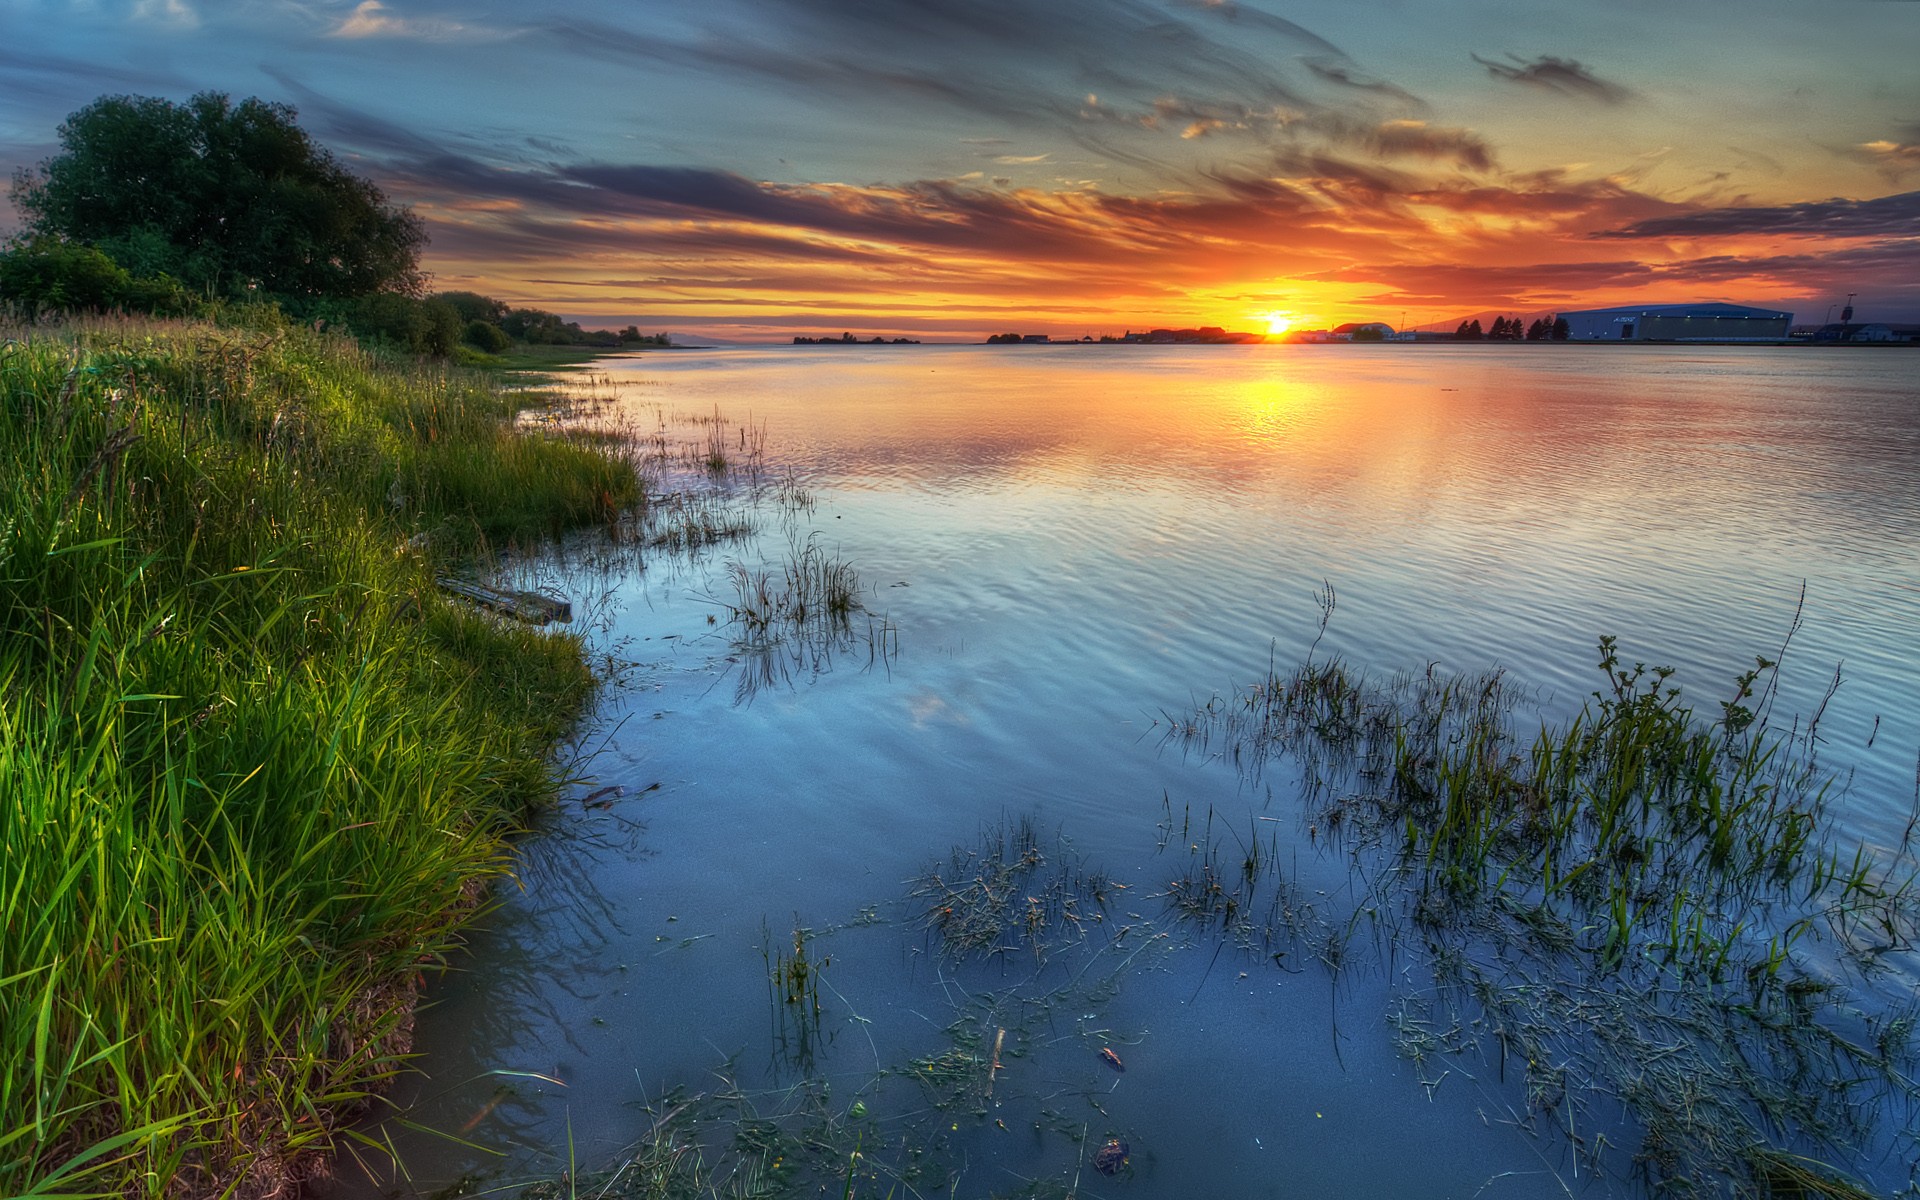 sunset, Clouds, Landscapes, Nature, Trees, Grass, Deviantart, Hdr, Photography, Rivers, Skyscapes Wallpaper